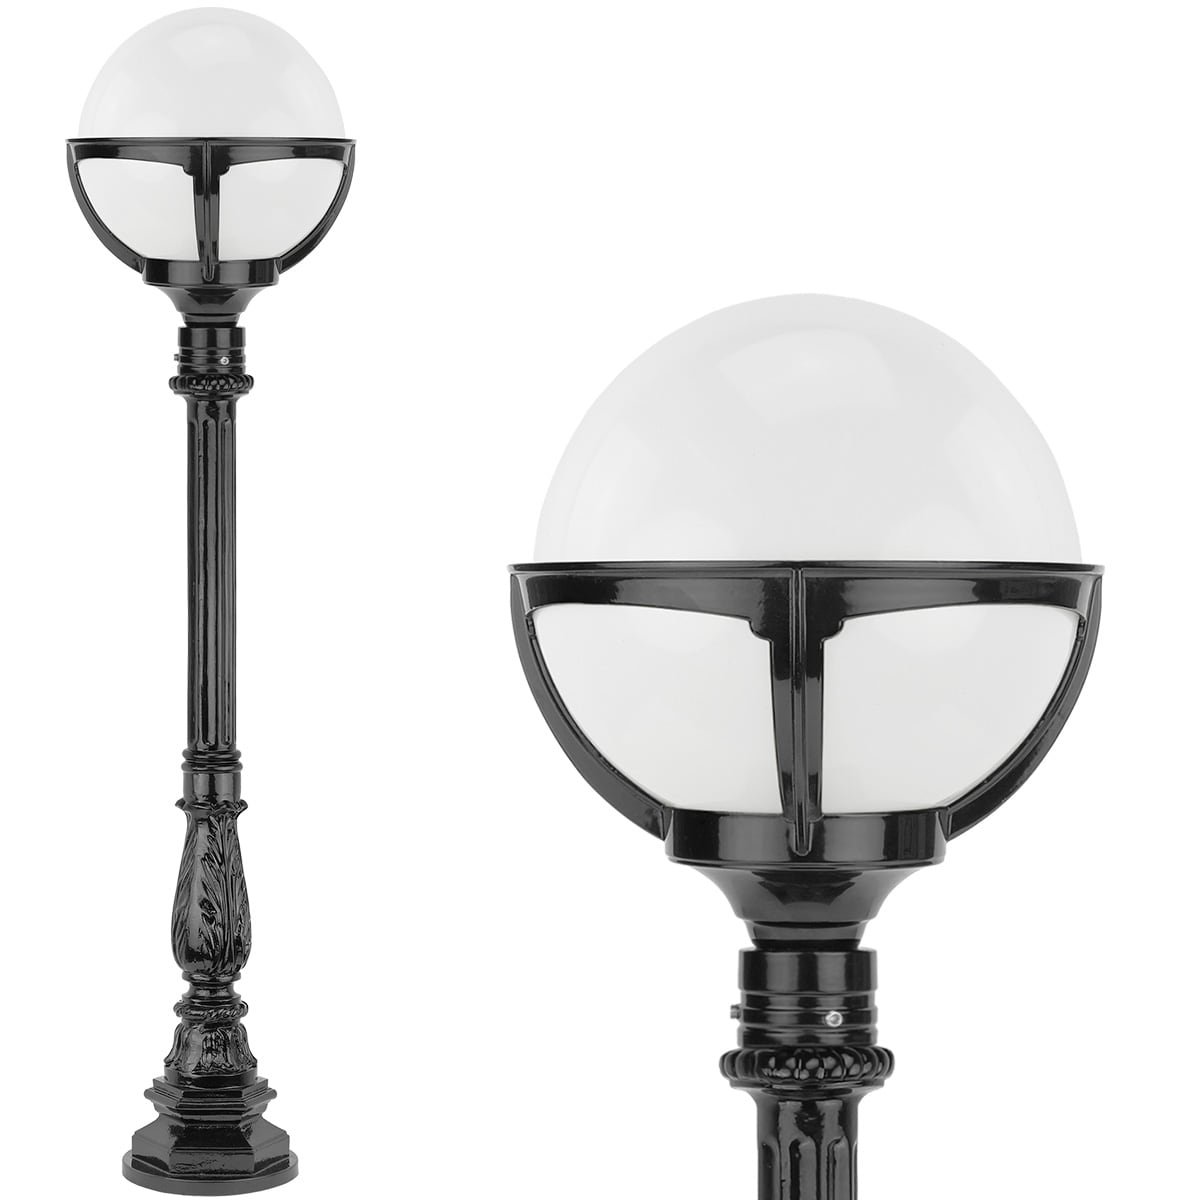 Bollamp paal wit glas - 120 cm | Manves.nl